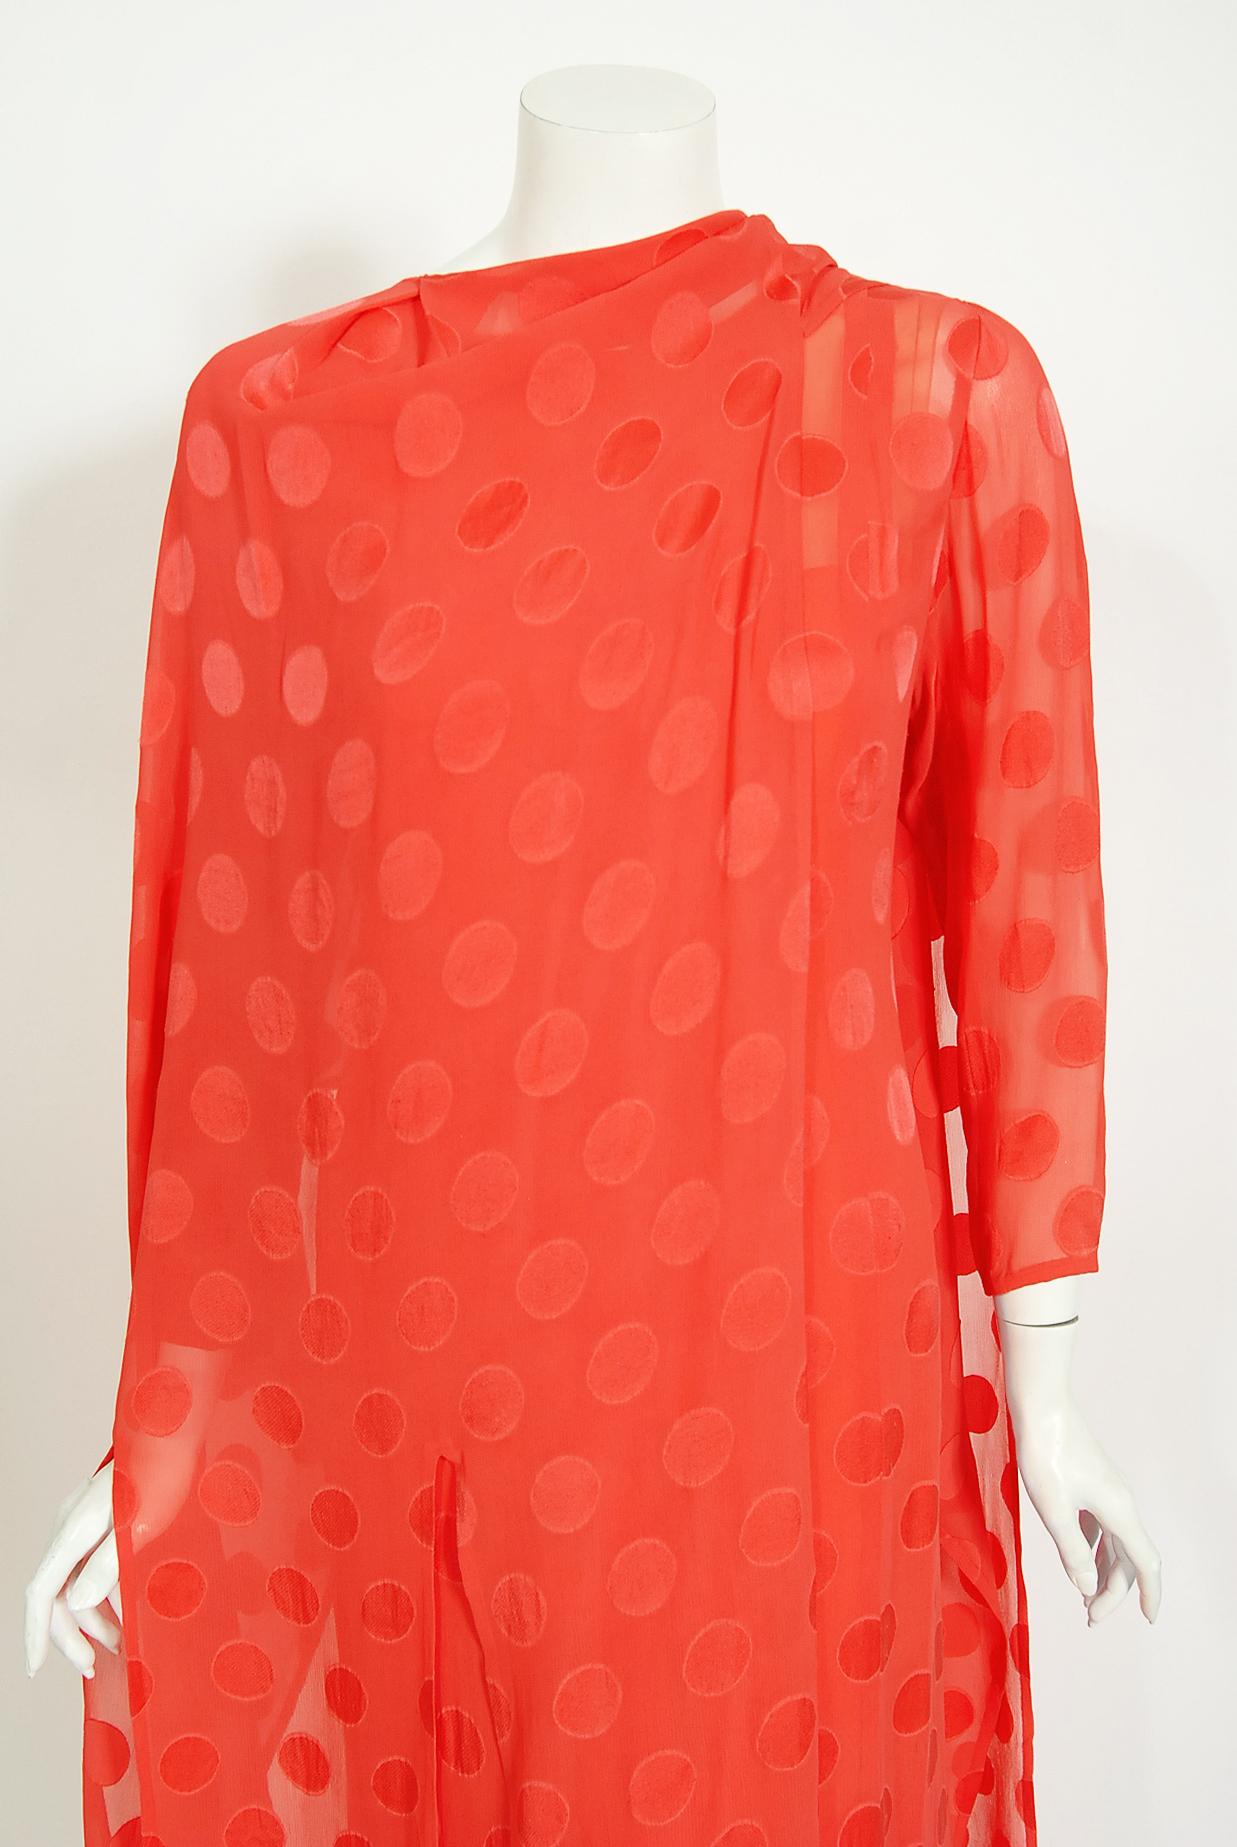 Archival 1973 Givenchy Haute Couture Orange Dotted Silk Carwash-Hem Caftan Gown In Good Condition For Sale In Beverly Hills, CA